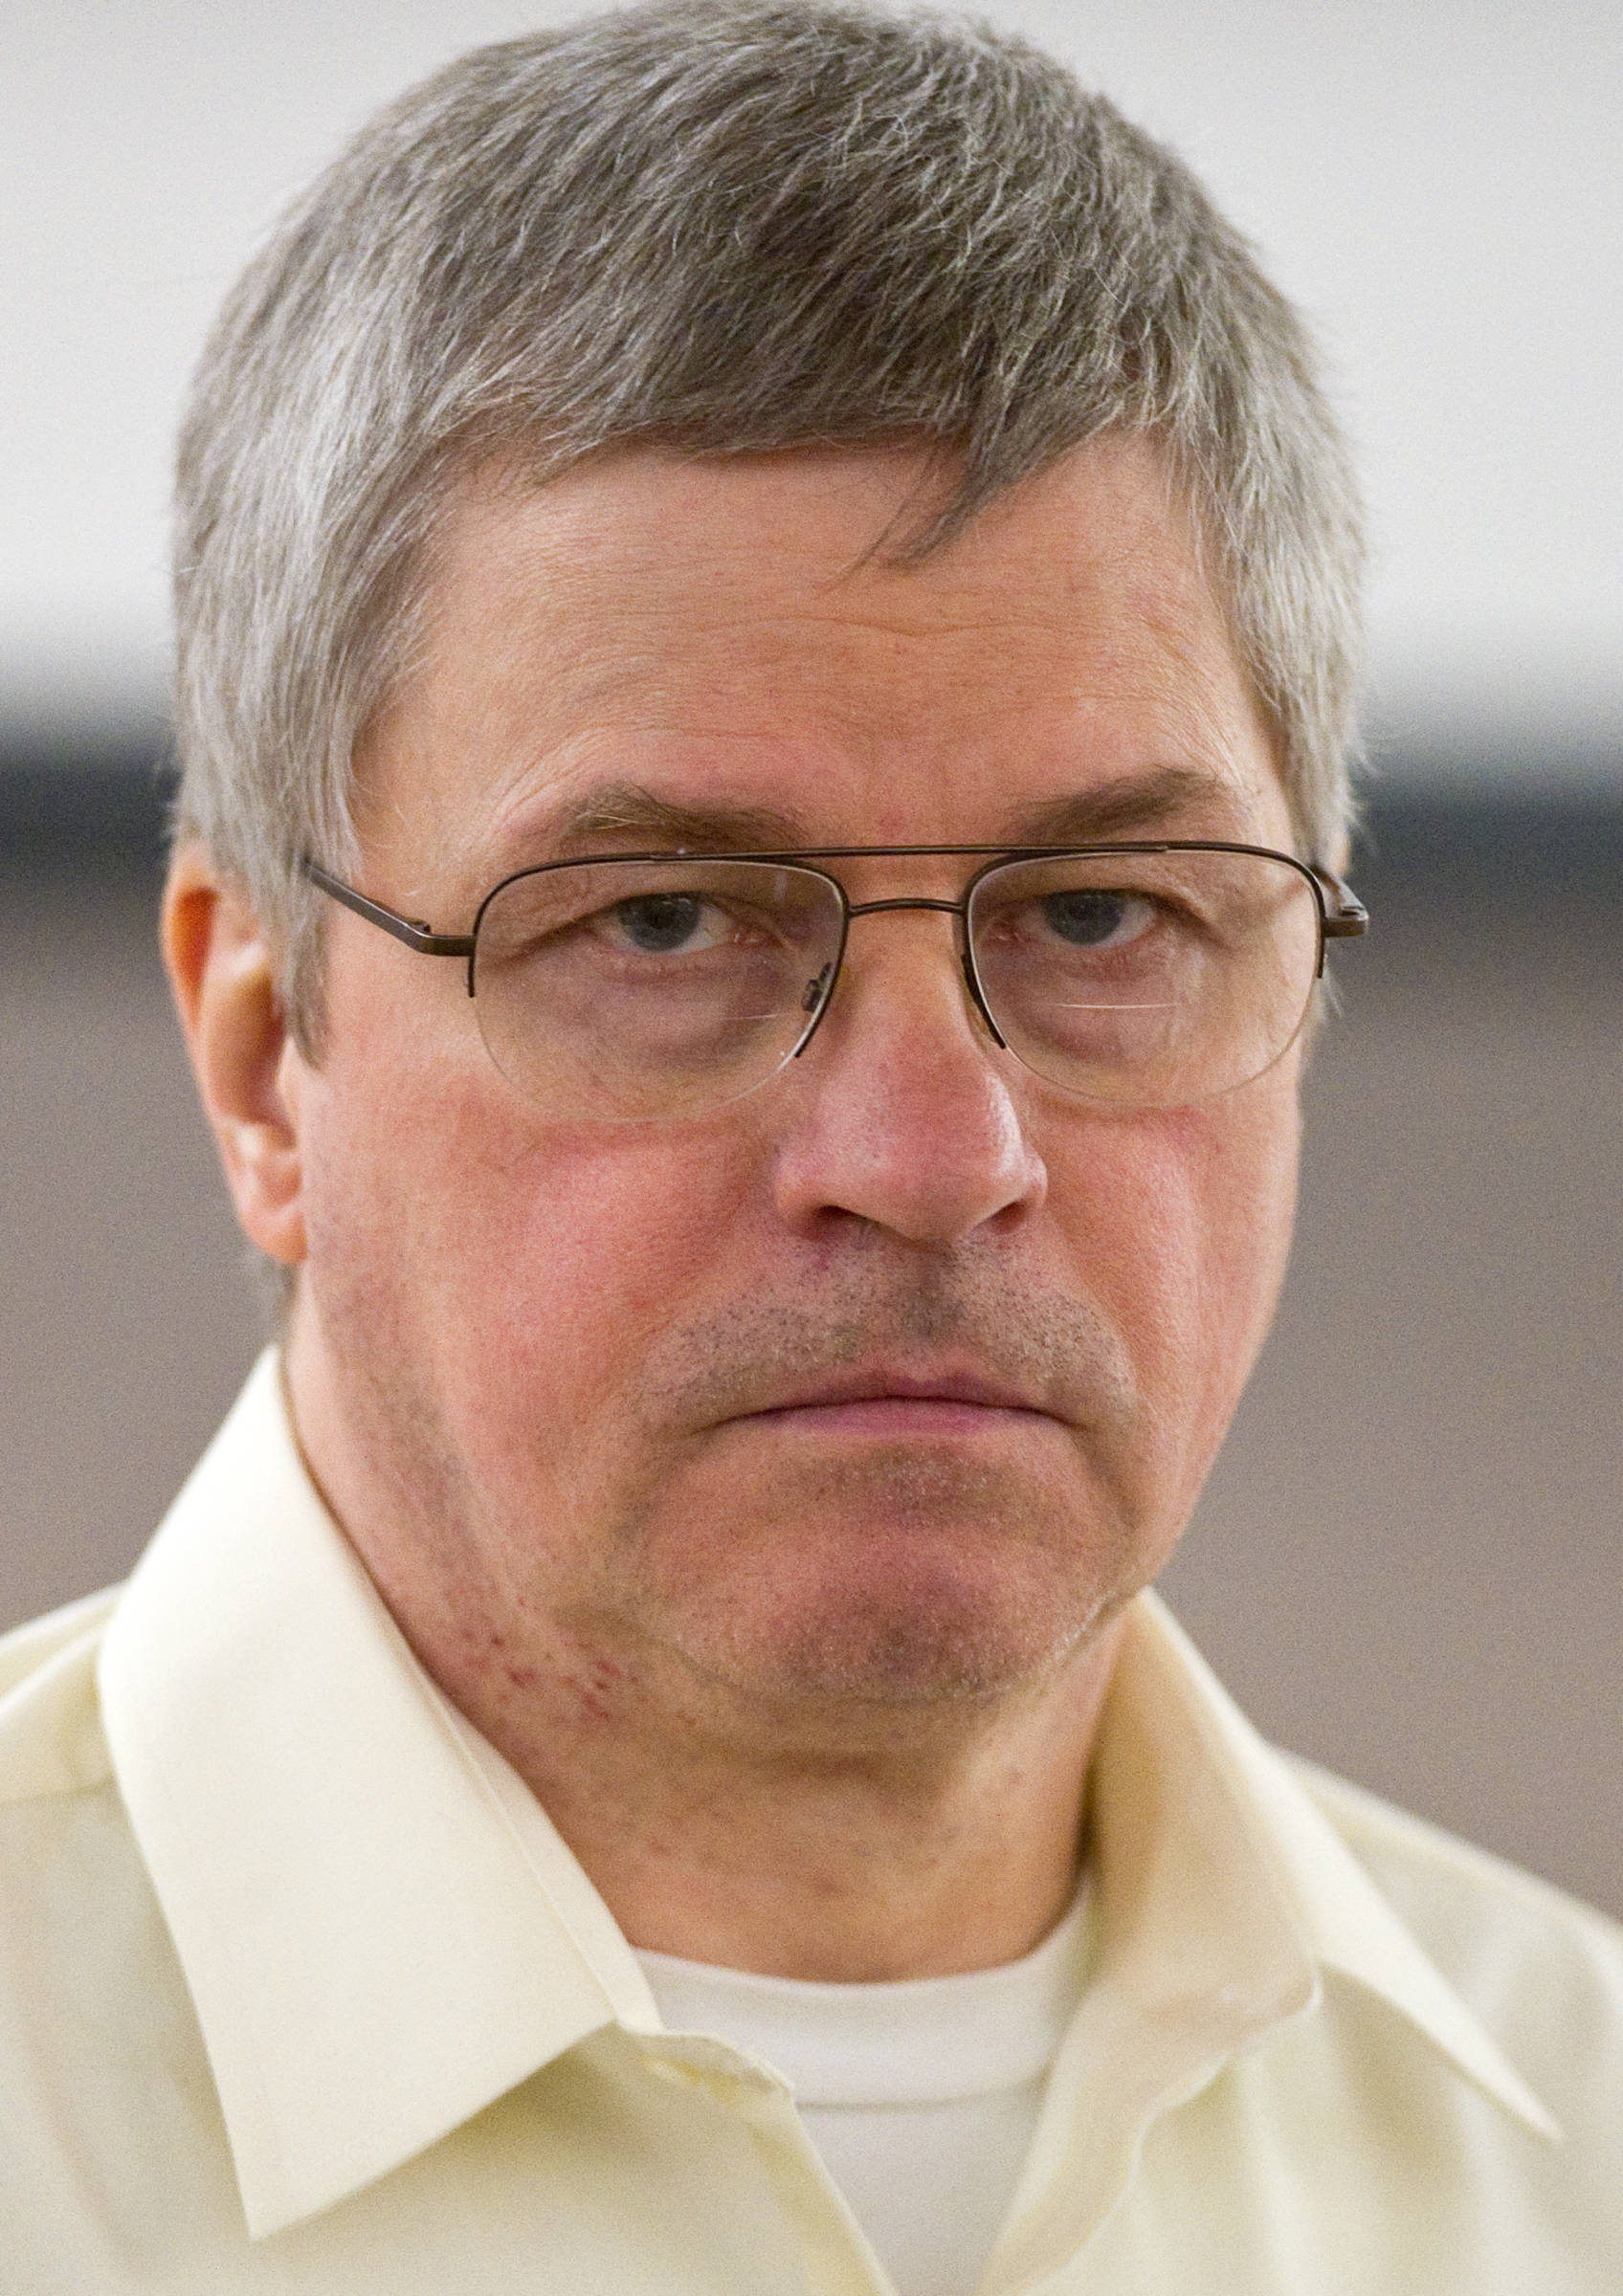 In this file photo on March 20, 2014, Robert D. Kowalski appears in Juneau Superior Court for the murder of his girlfriend at a Yakutat lodge nearly 20 years ago. (Michael Penn | Juneau Empire File)